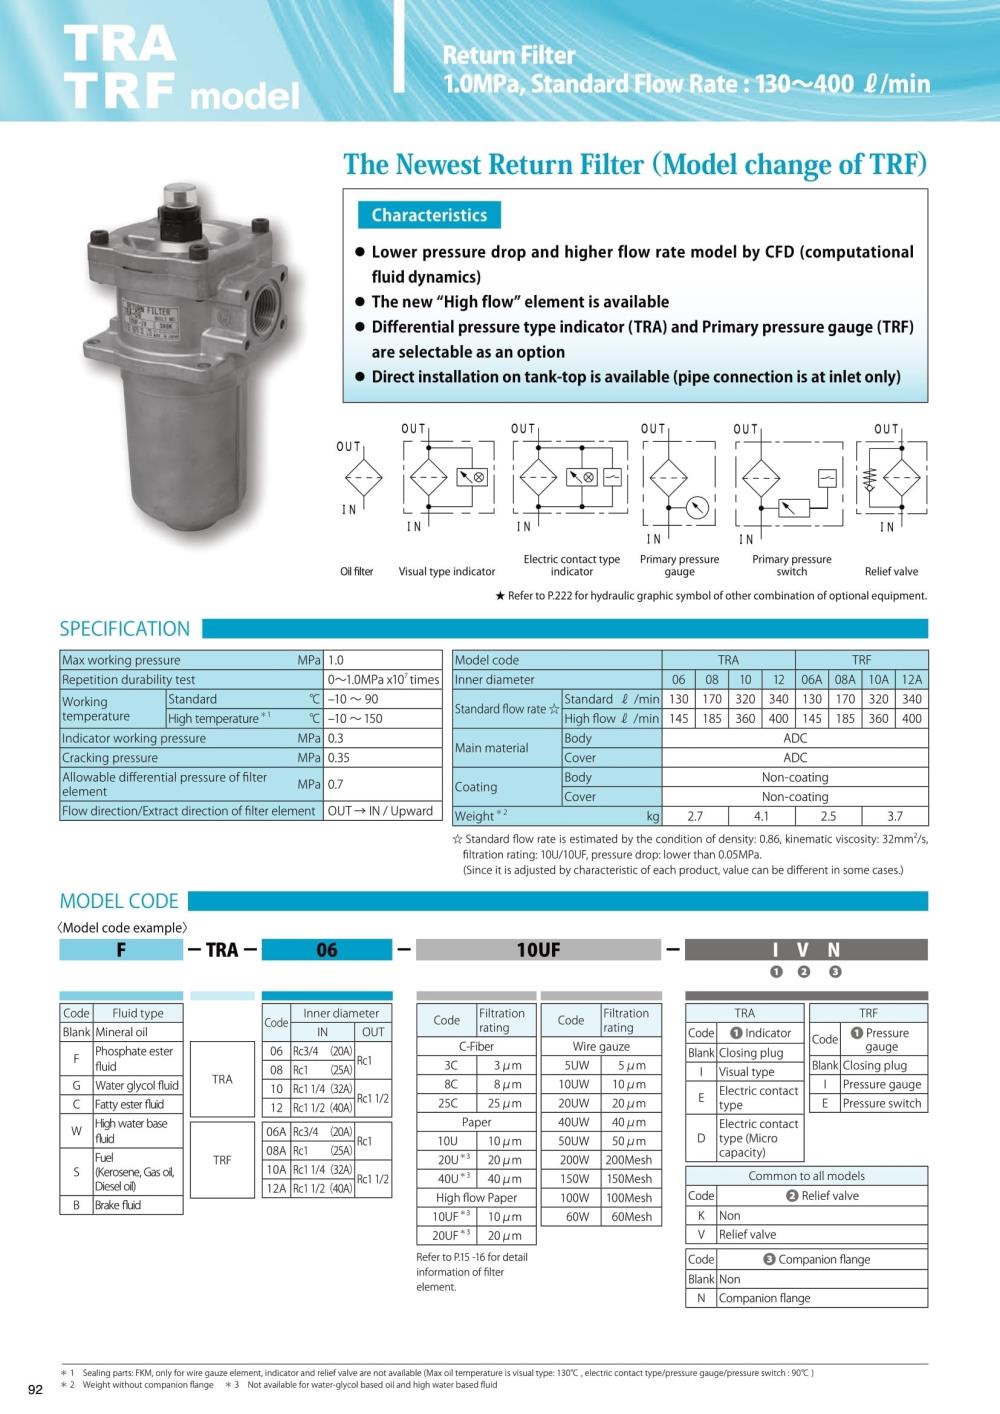 TAISEI Oil Filter TRF-10A-3C-IVN Series,TRF-10A-3C-IVN, TRF-10A-8C-IVN, TRF-10A-25C-IVN, TRF-10A-10U-IVN, TRF-10A-20U-IVN, TRF-10A-40U-IVN, TRF-10A-10UF-IVN, TRF-10A-20UF-IVN, TRF-10A-5UW-IVN, TRF-10A-10UW-IVN, TRF-10A-20UW-IVN, TRF-10A-40UW-IVN, TRF-10A-50UW-IVN, TRF-10A-200W-IVN, TRF-10A-150W-IVN, TRF-10A-100W-IVN, TRF-10A-60W-IVN, TAISEI, Oil Filter, Return Filter,TAISEI,Machinery and Process Equipment/Filters/Gas & Oil